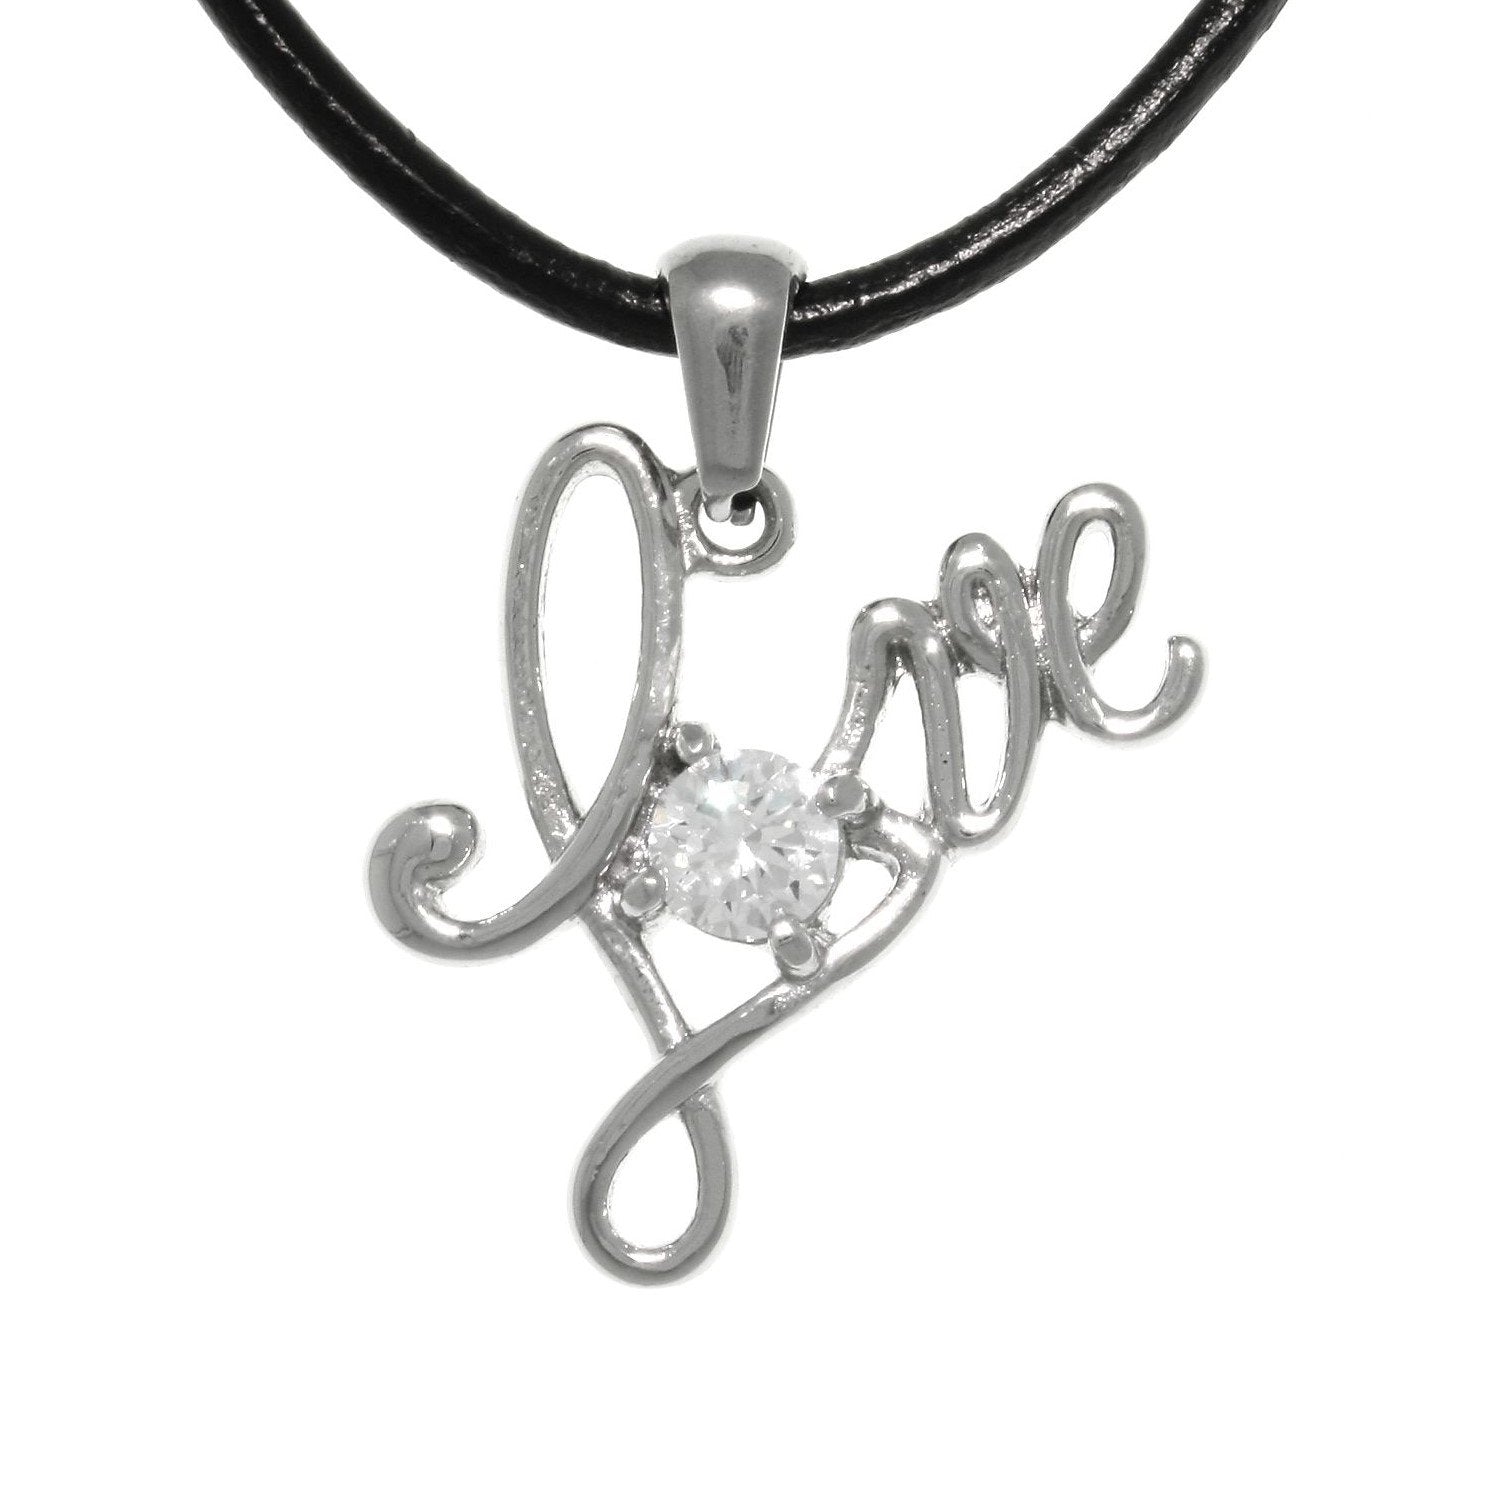 LOVE Necklace - Stainless Steel CZ Crystal Love Word Sentiment Pendant on Black Leather Necklace